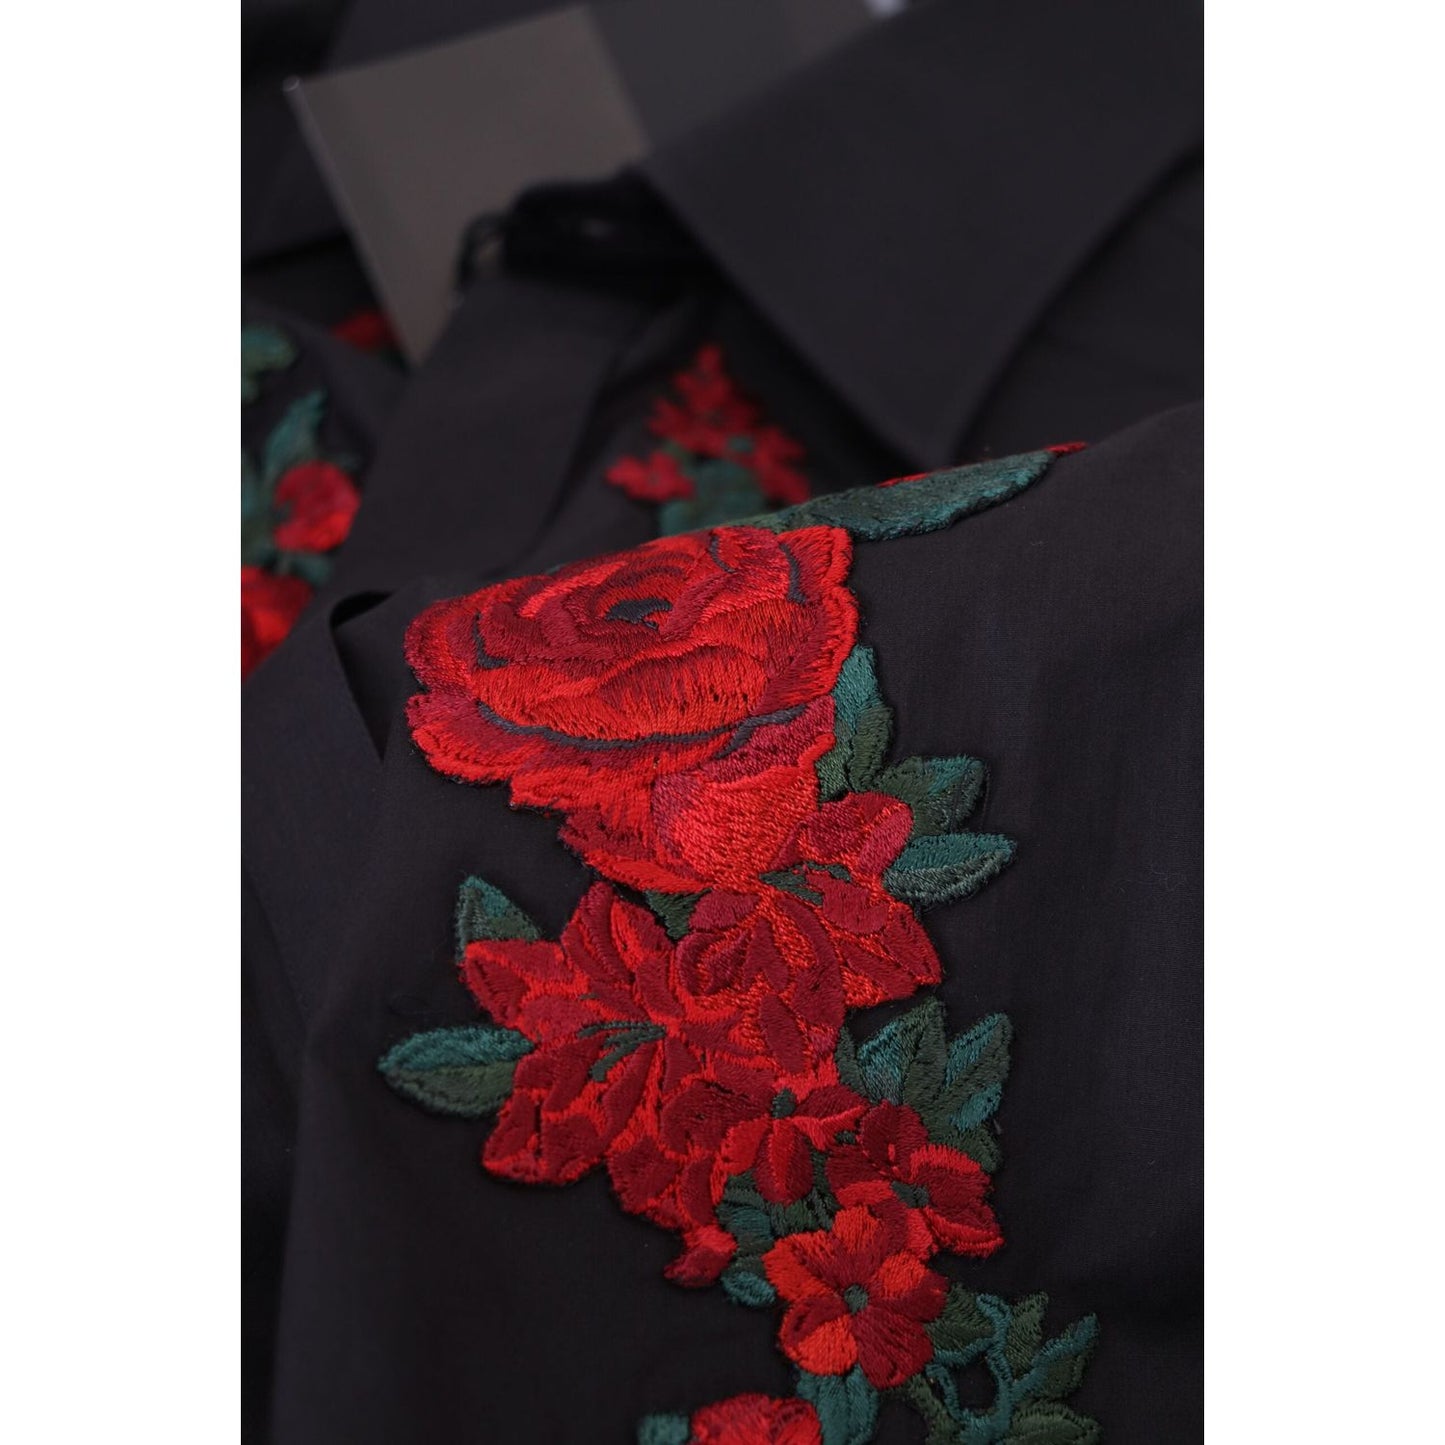 Dolce & Gabbana Elegant Floral Embroidered Cotton Shirt black-floral-embroidery-men-long-sleeves-gold-shirt IMG_6997-scaled-eb437338-6b6.jpg